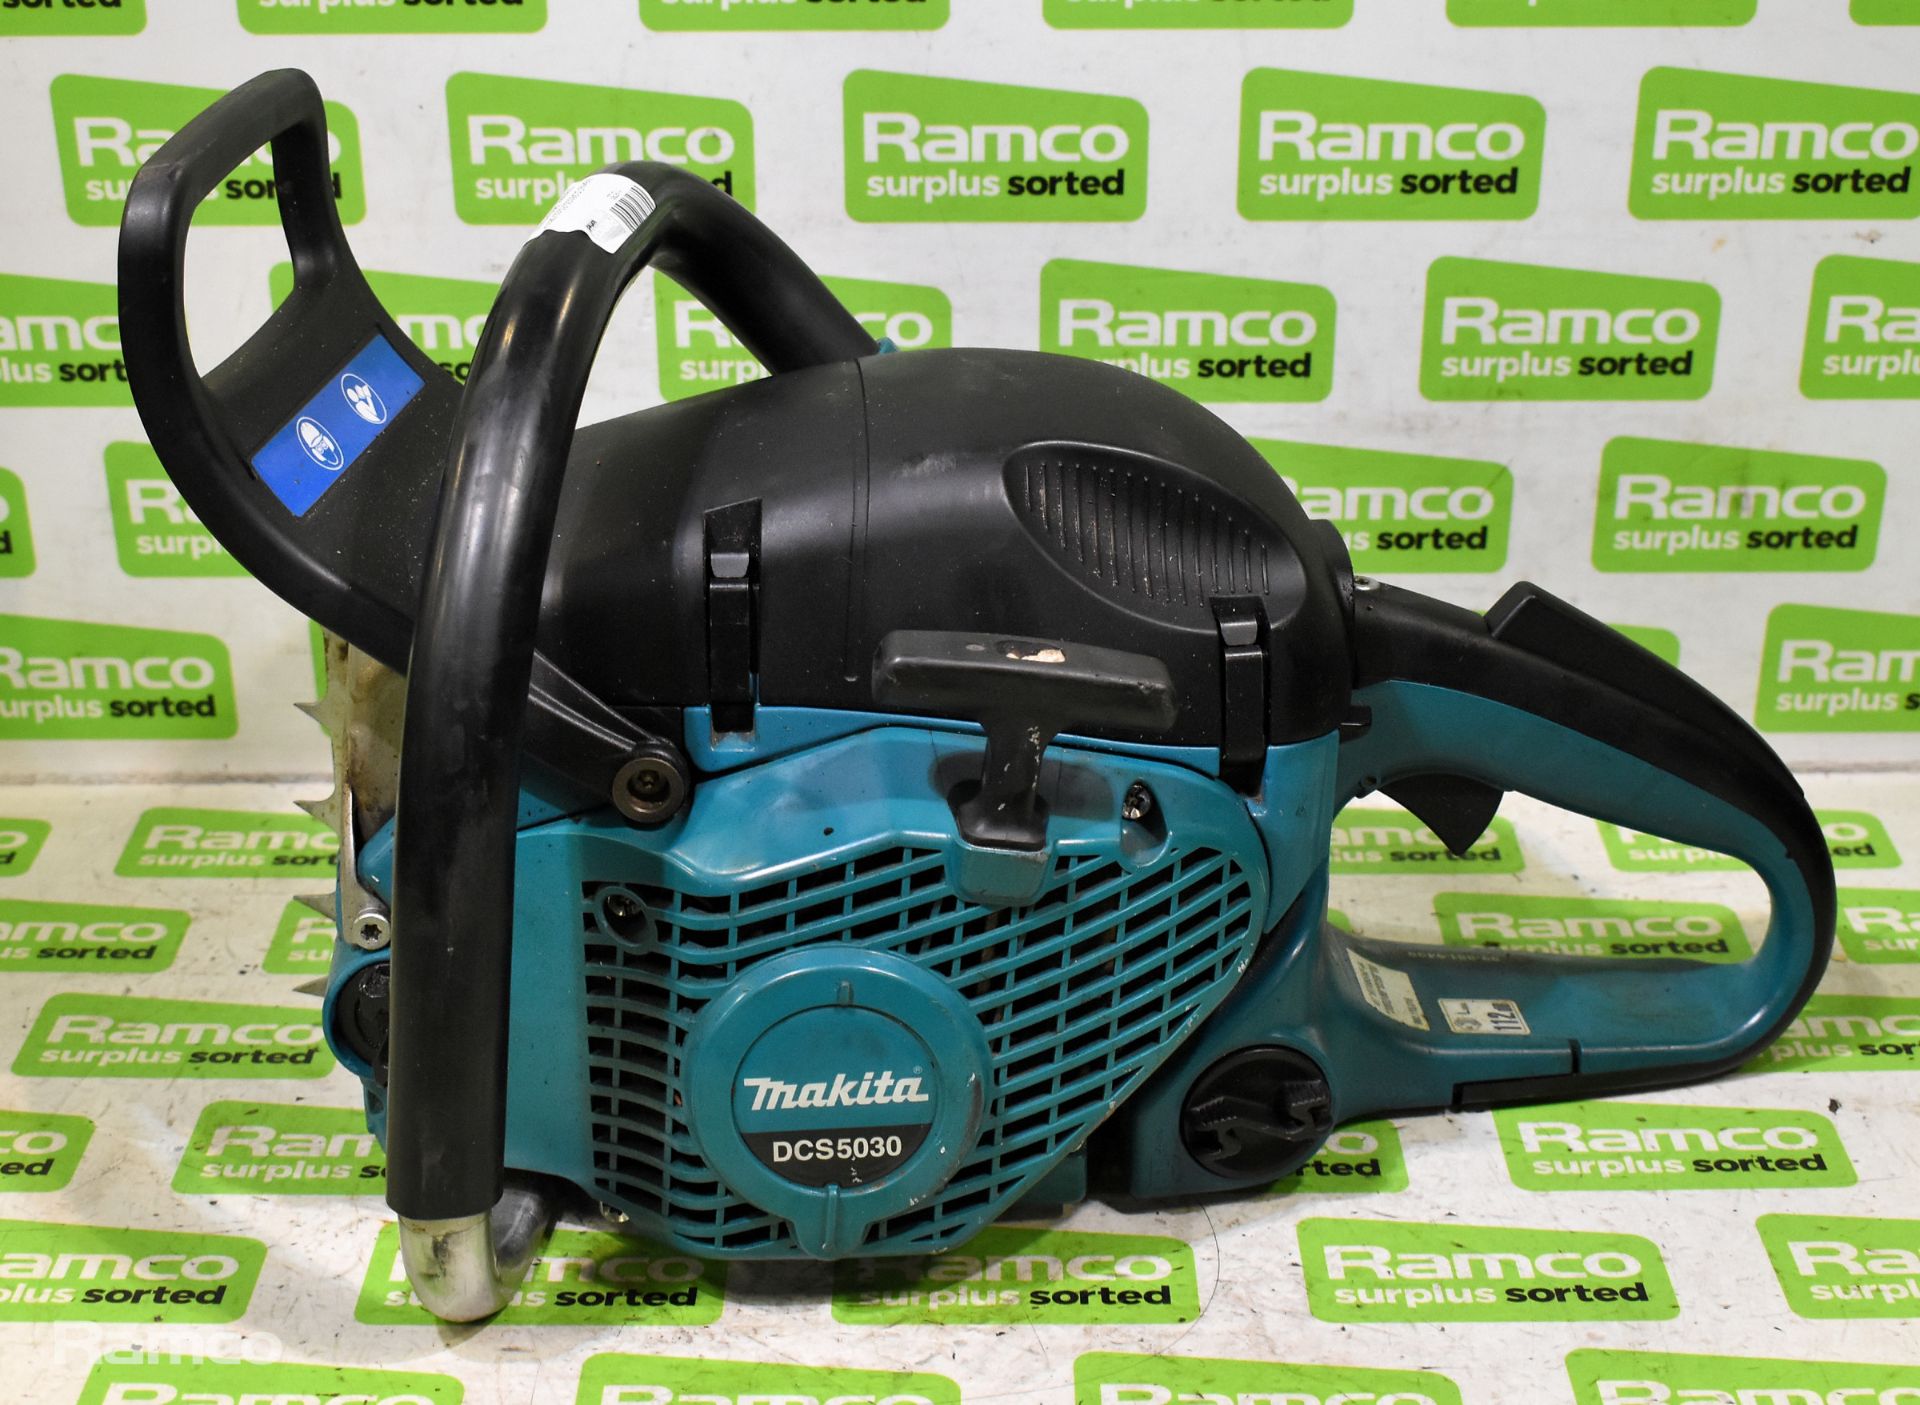 4x Makita DCS5030 50cc petrol chainsaw - BODIES ONLY - AS SPARES AND REPAIRS - Image 10 of 21